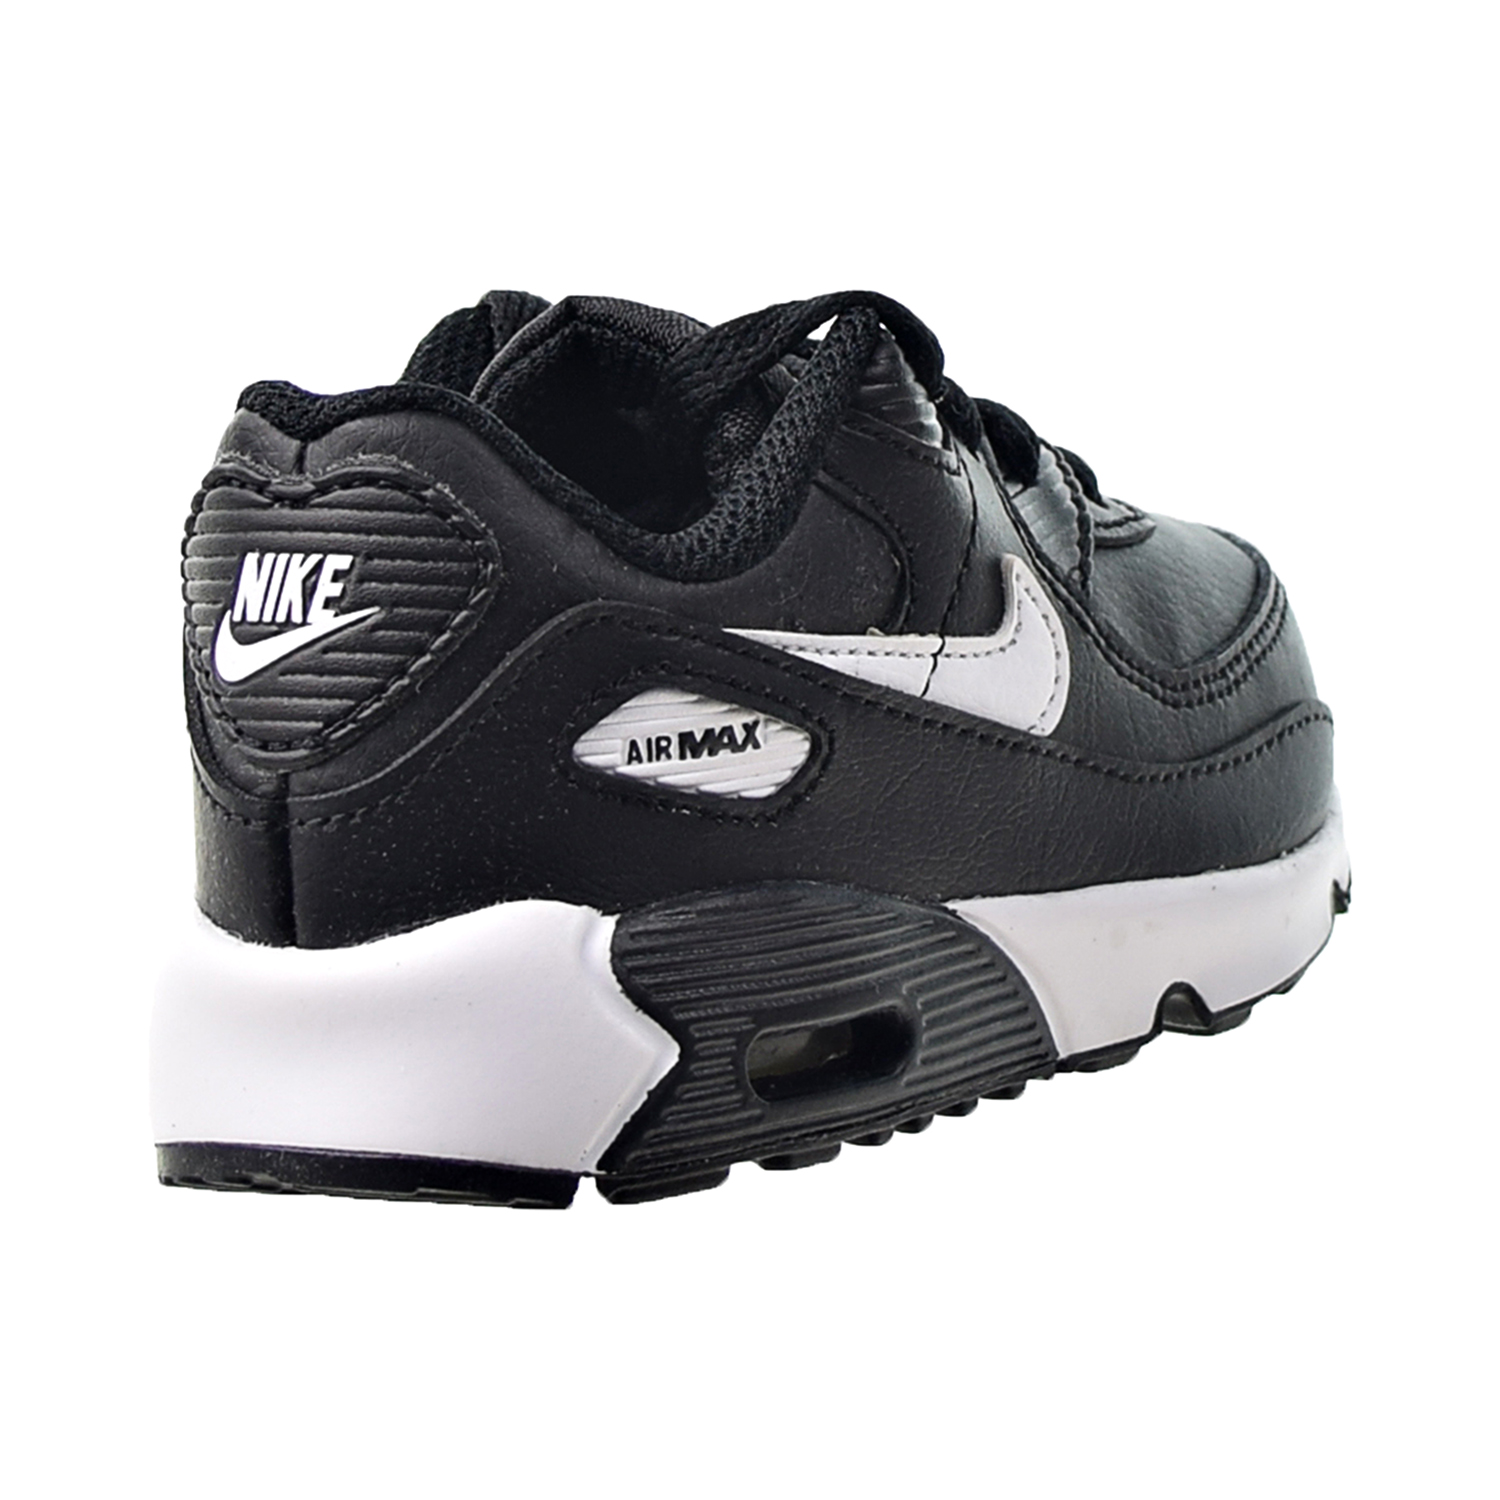 Nike Air Max 90 LTR Toddlers' Shoes Black-Black-White cd6868-010 - image 3 of 6